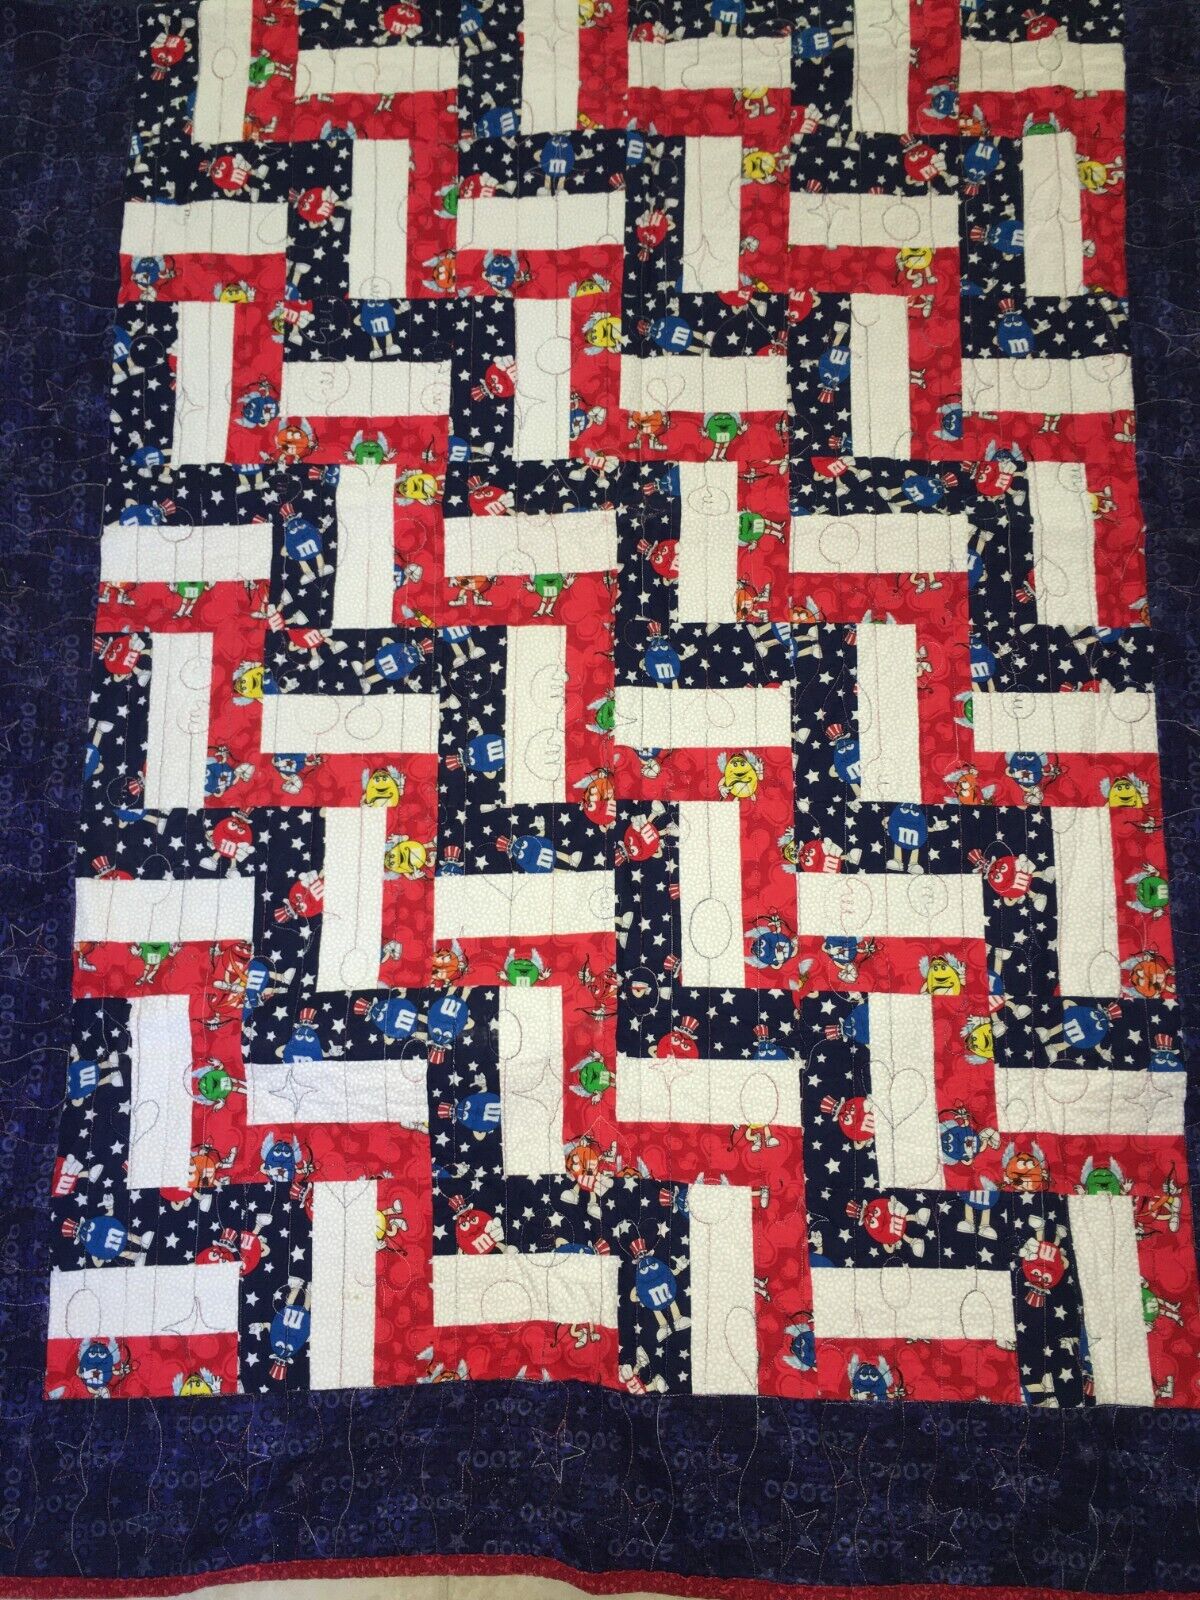 M&M red white blue handmade quilt 60x44 lap blanket bed coverlet M&M\'s candy